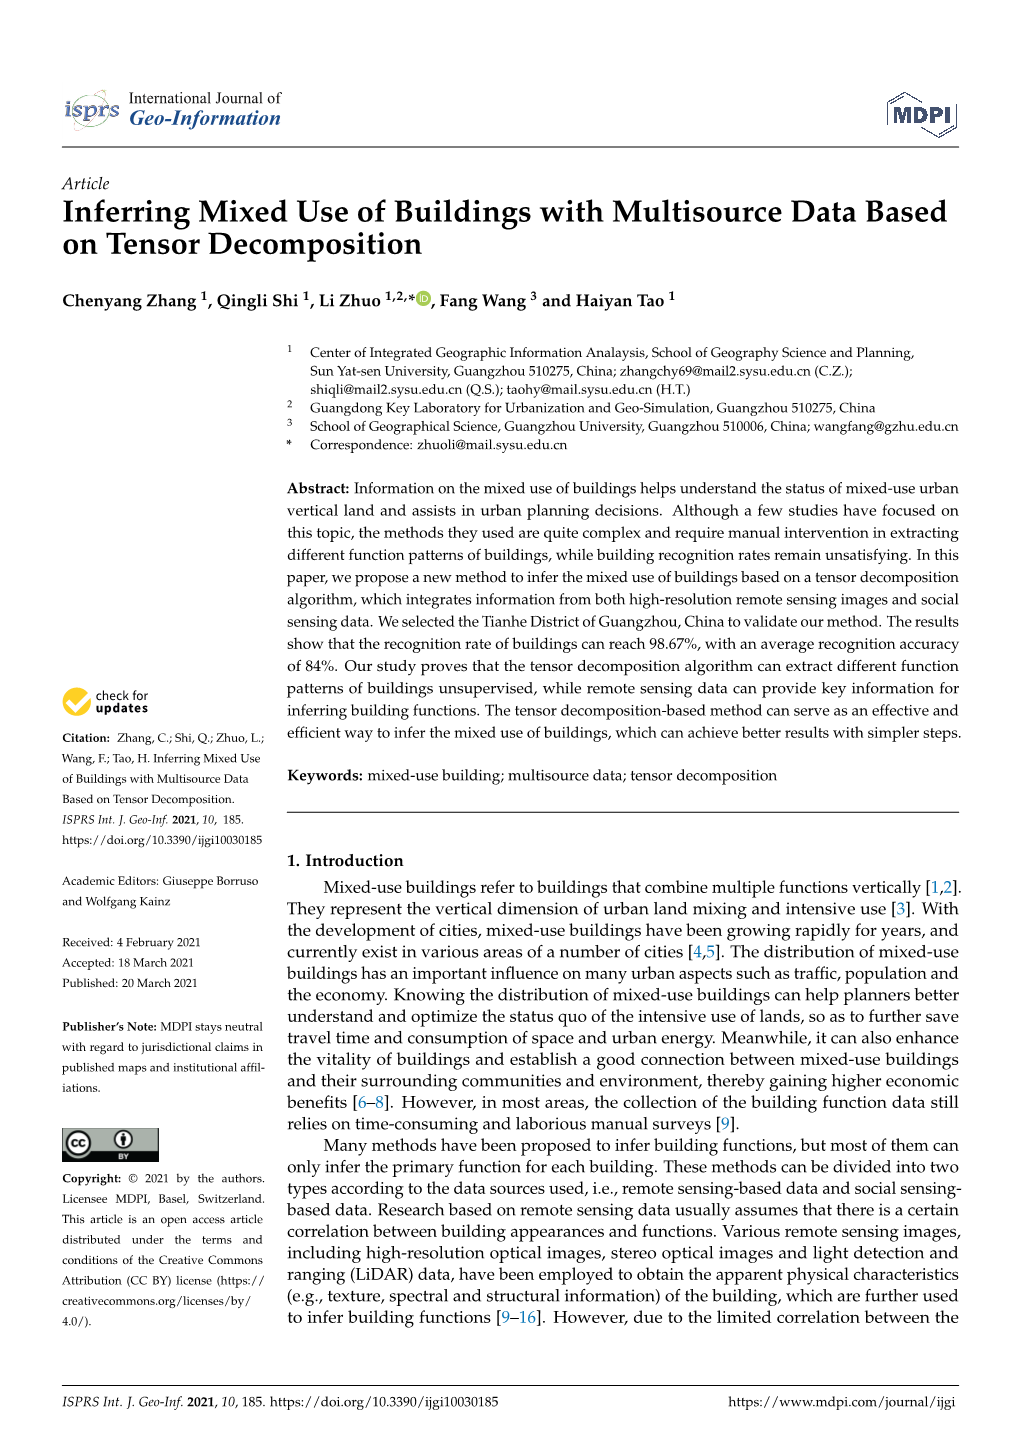 Inferring Mixed Use of Buildings with Multisource Data Based on Tensor Decomposition